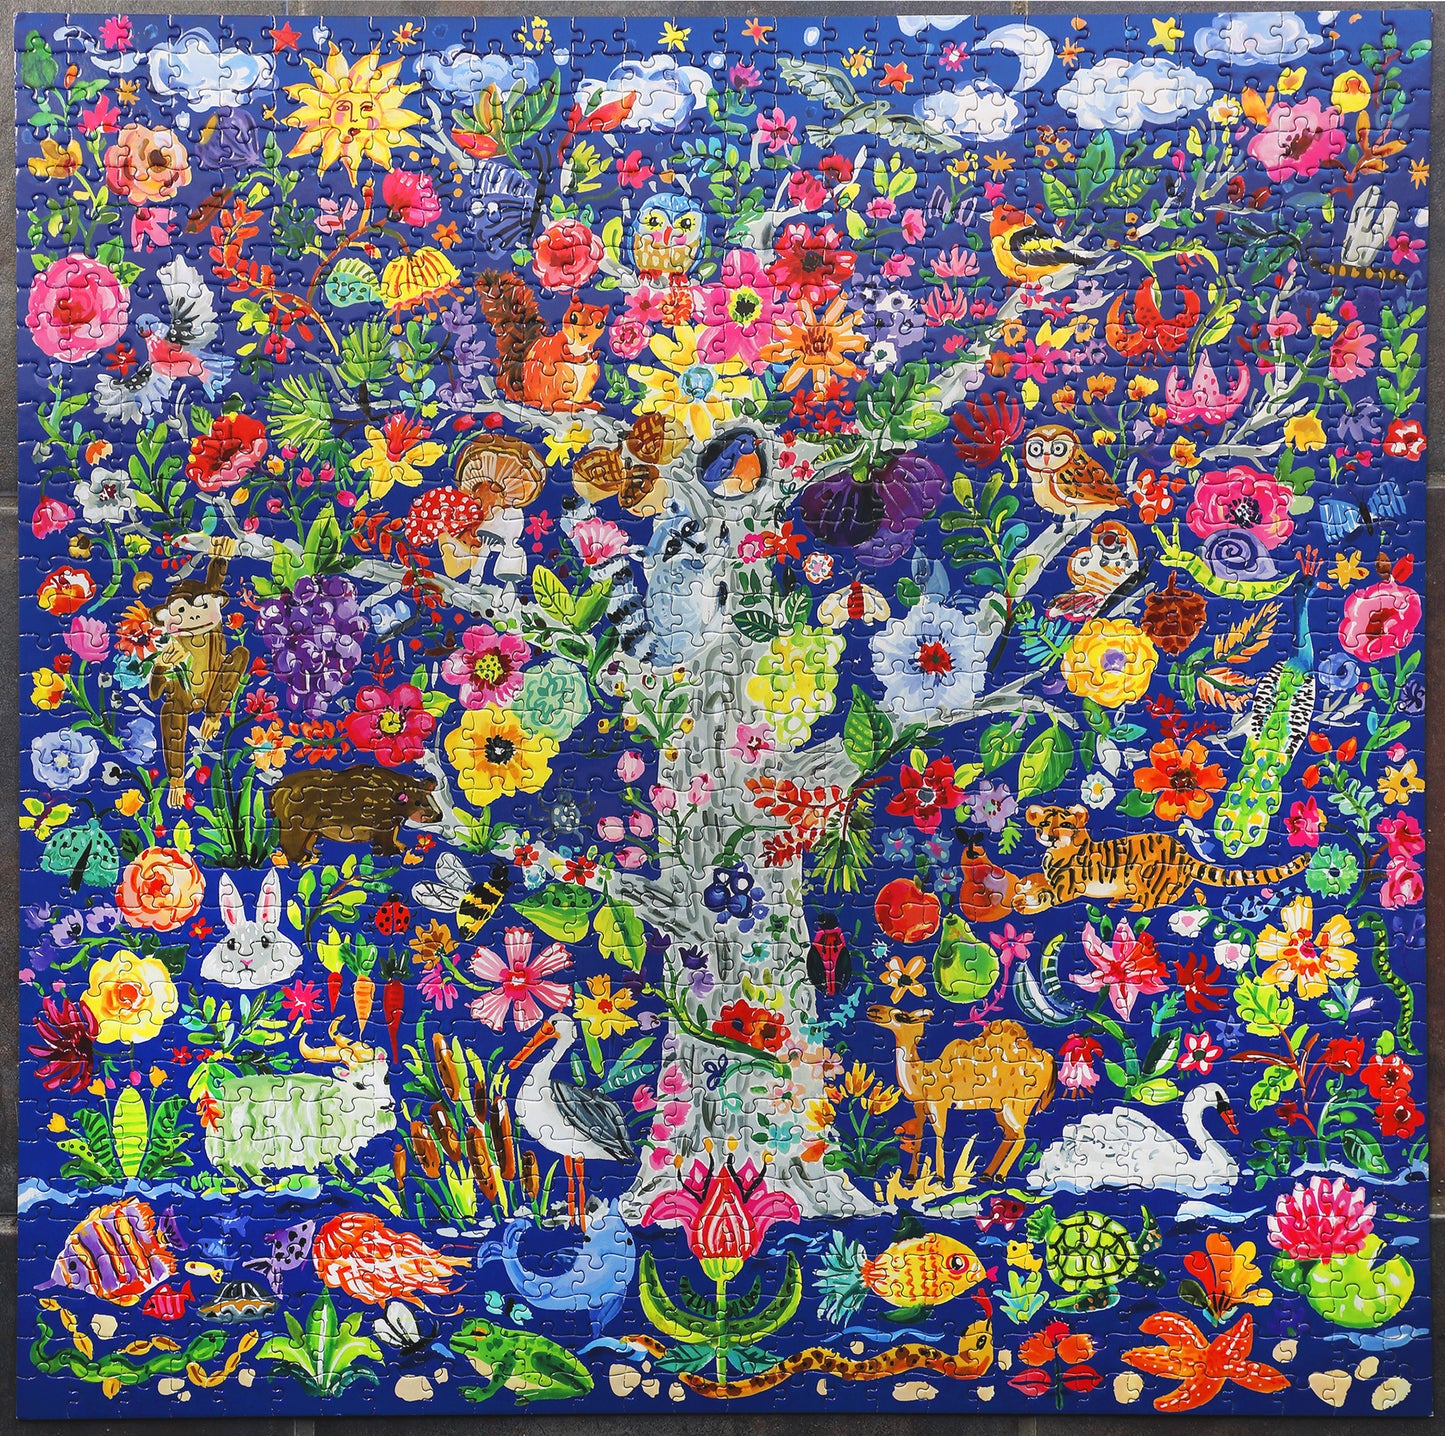 Tree of Life 1000 Piece Jigsaw Nature Puzzle | eeBoo Piece & Love | Gifts for Nature Lovers